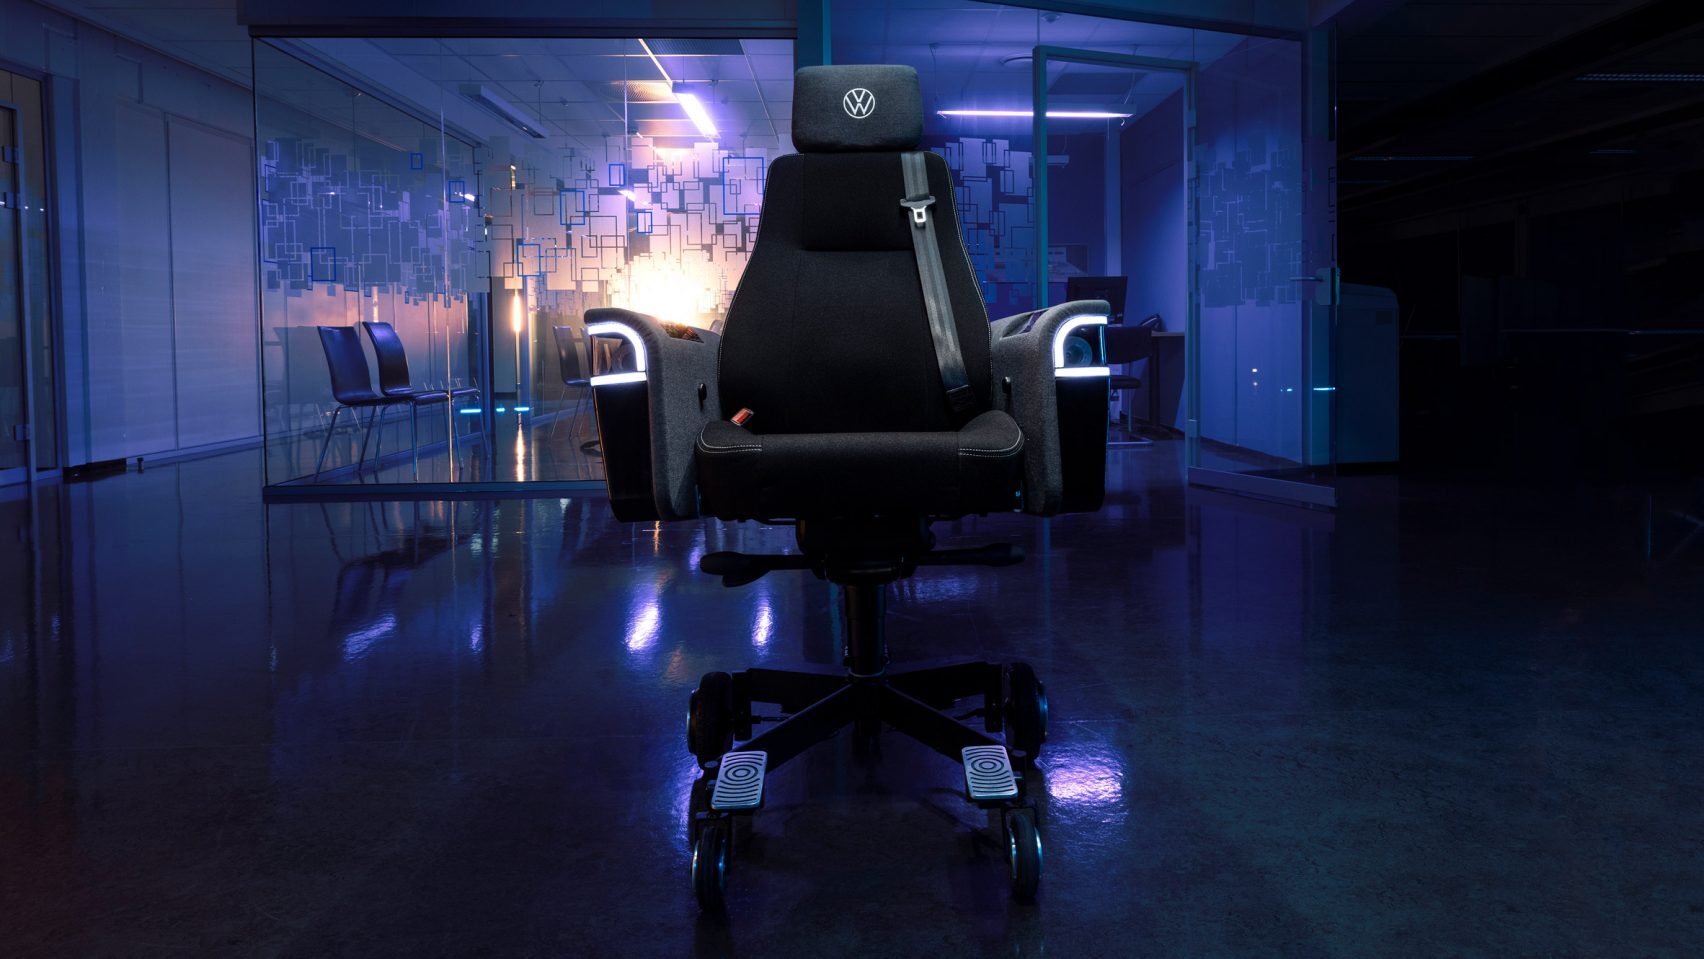 An office chair that is capable of driving at 20kmh is shown front-on, in a darkened office space with some low blue lighting behind.